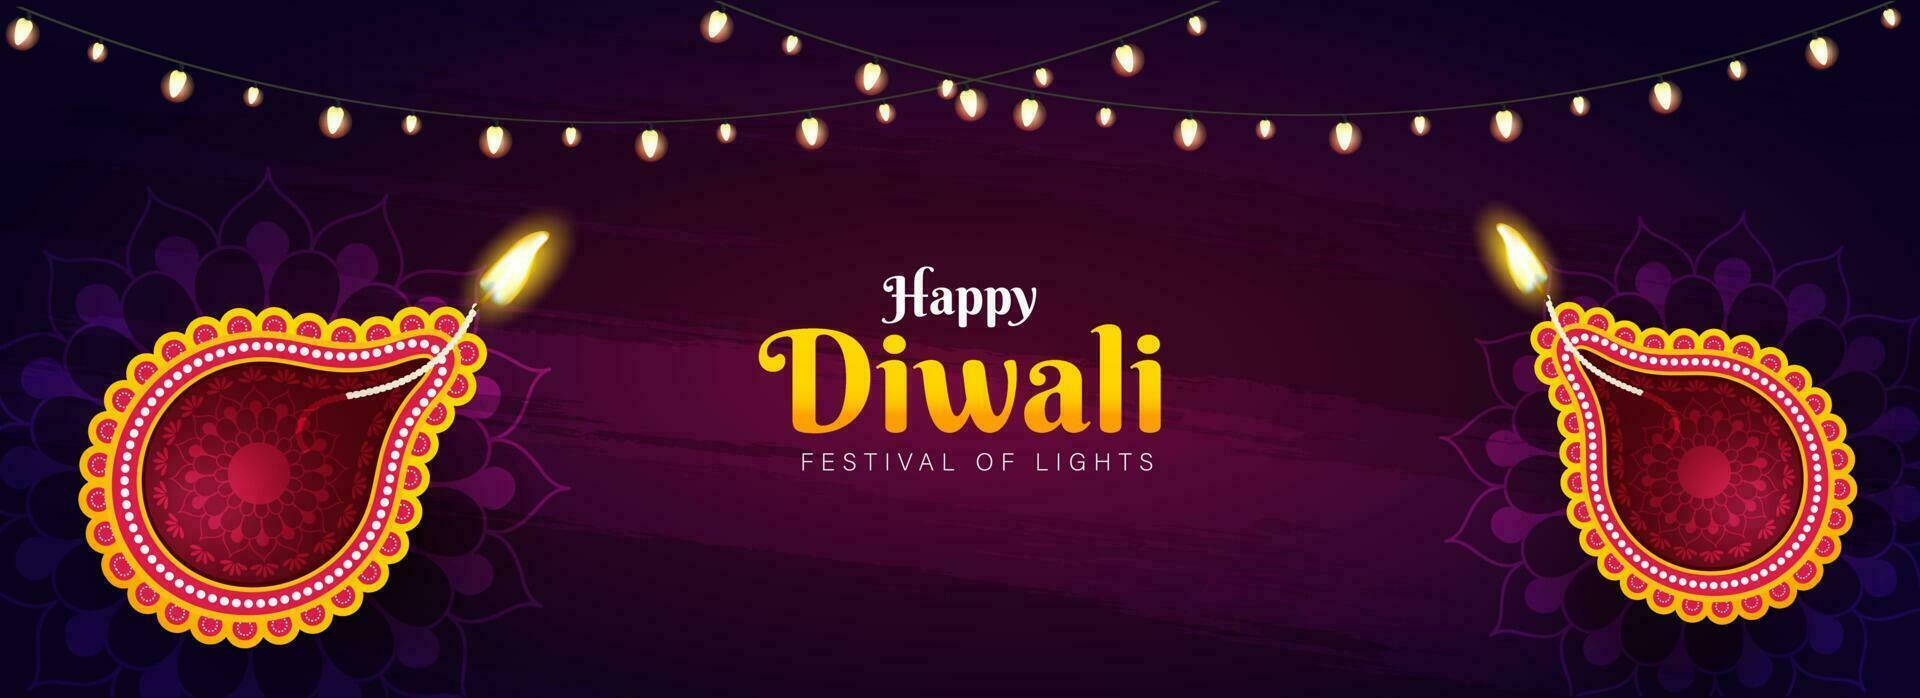 Happy Diwali celebration header or banner design with top view of illuminated oil lamps and lighting garland decorated on purple texture background. vector